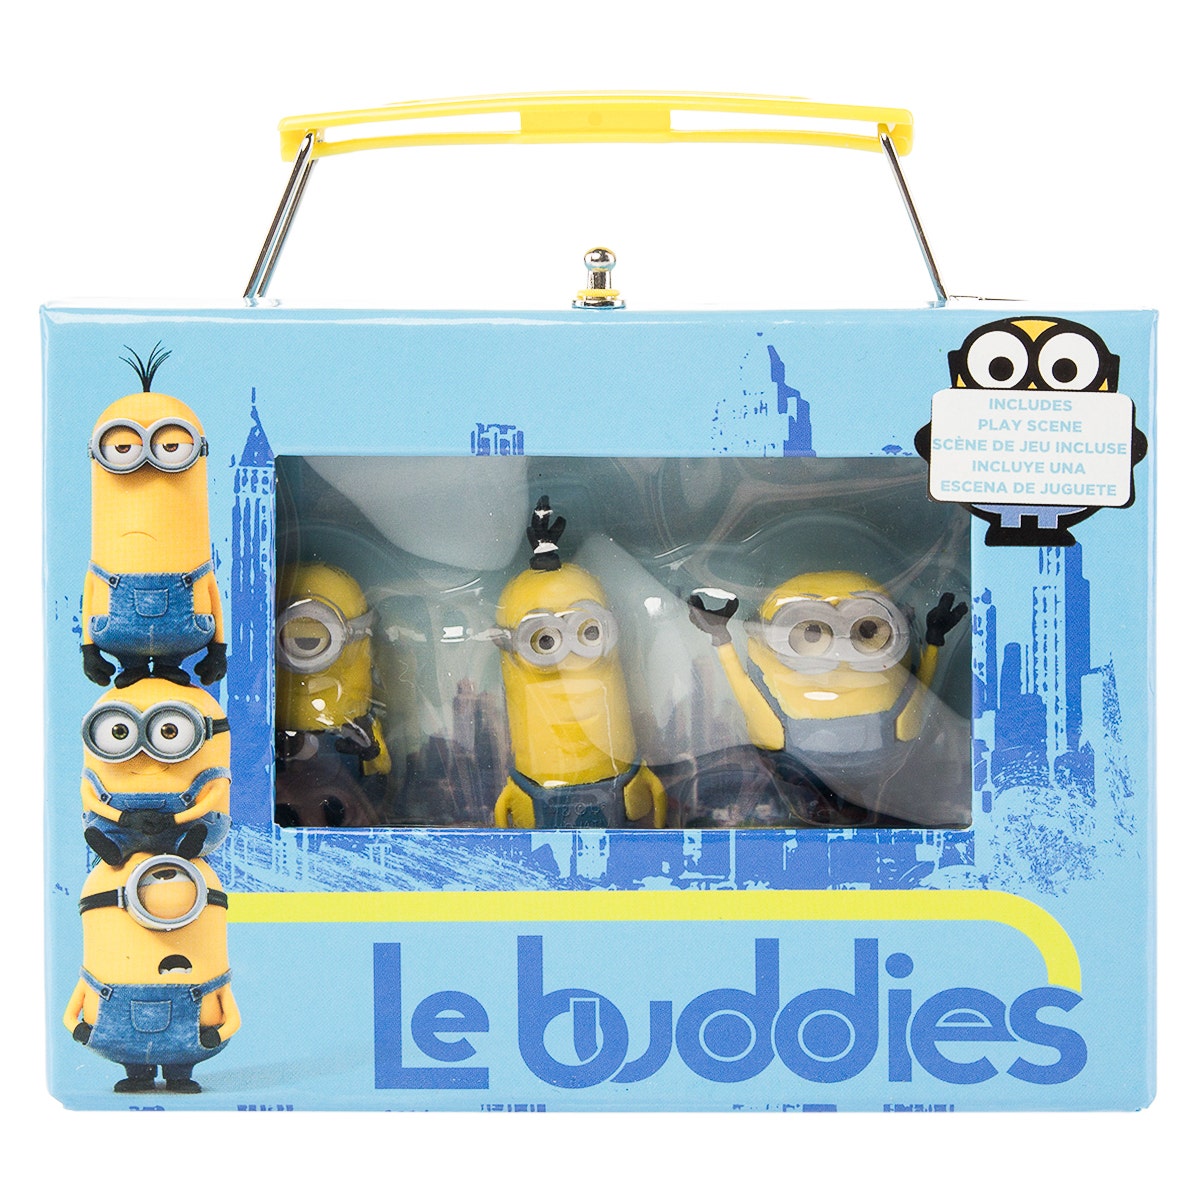 Accessory innovation Despicable Me Minion Soft Lunch Kit/Lunch Bag/Box